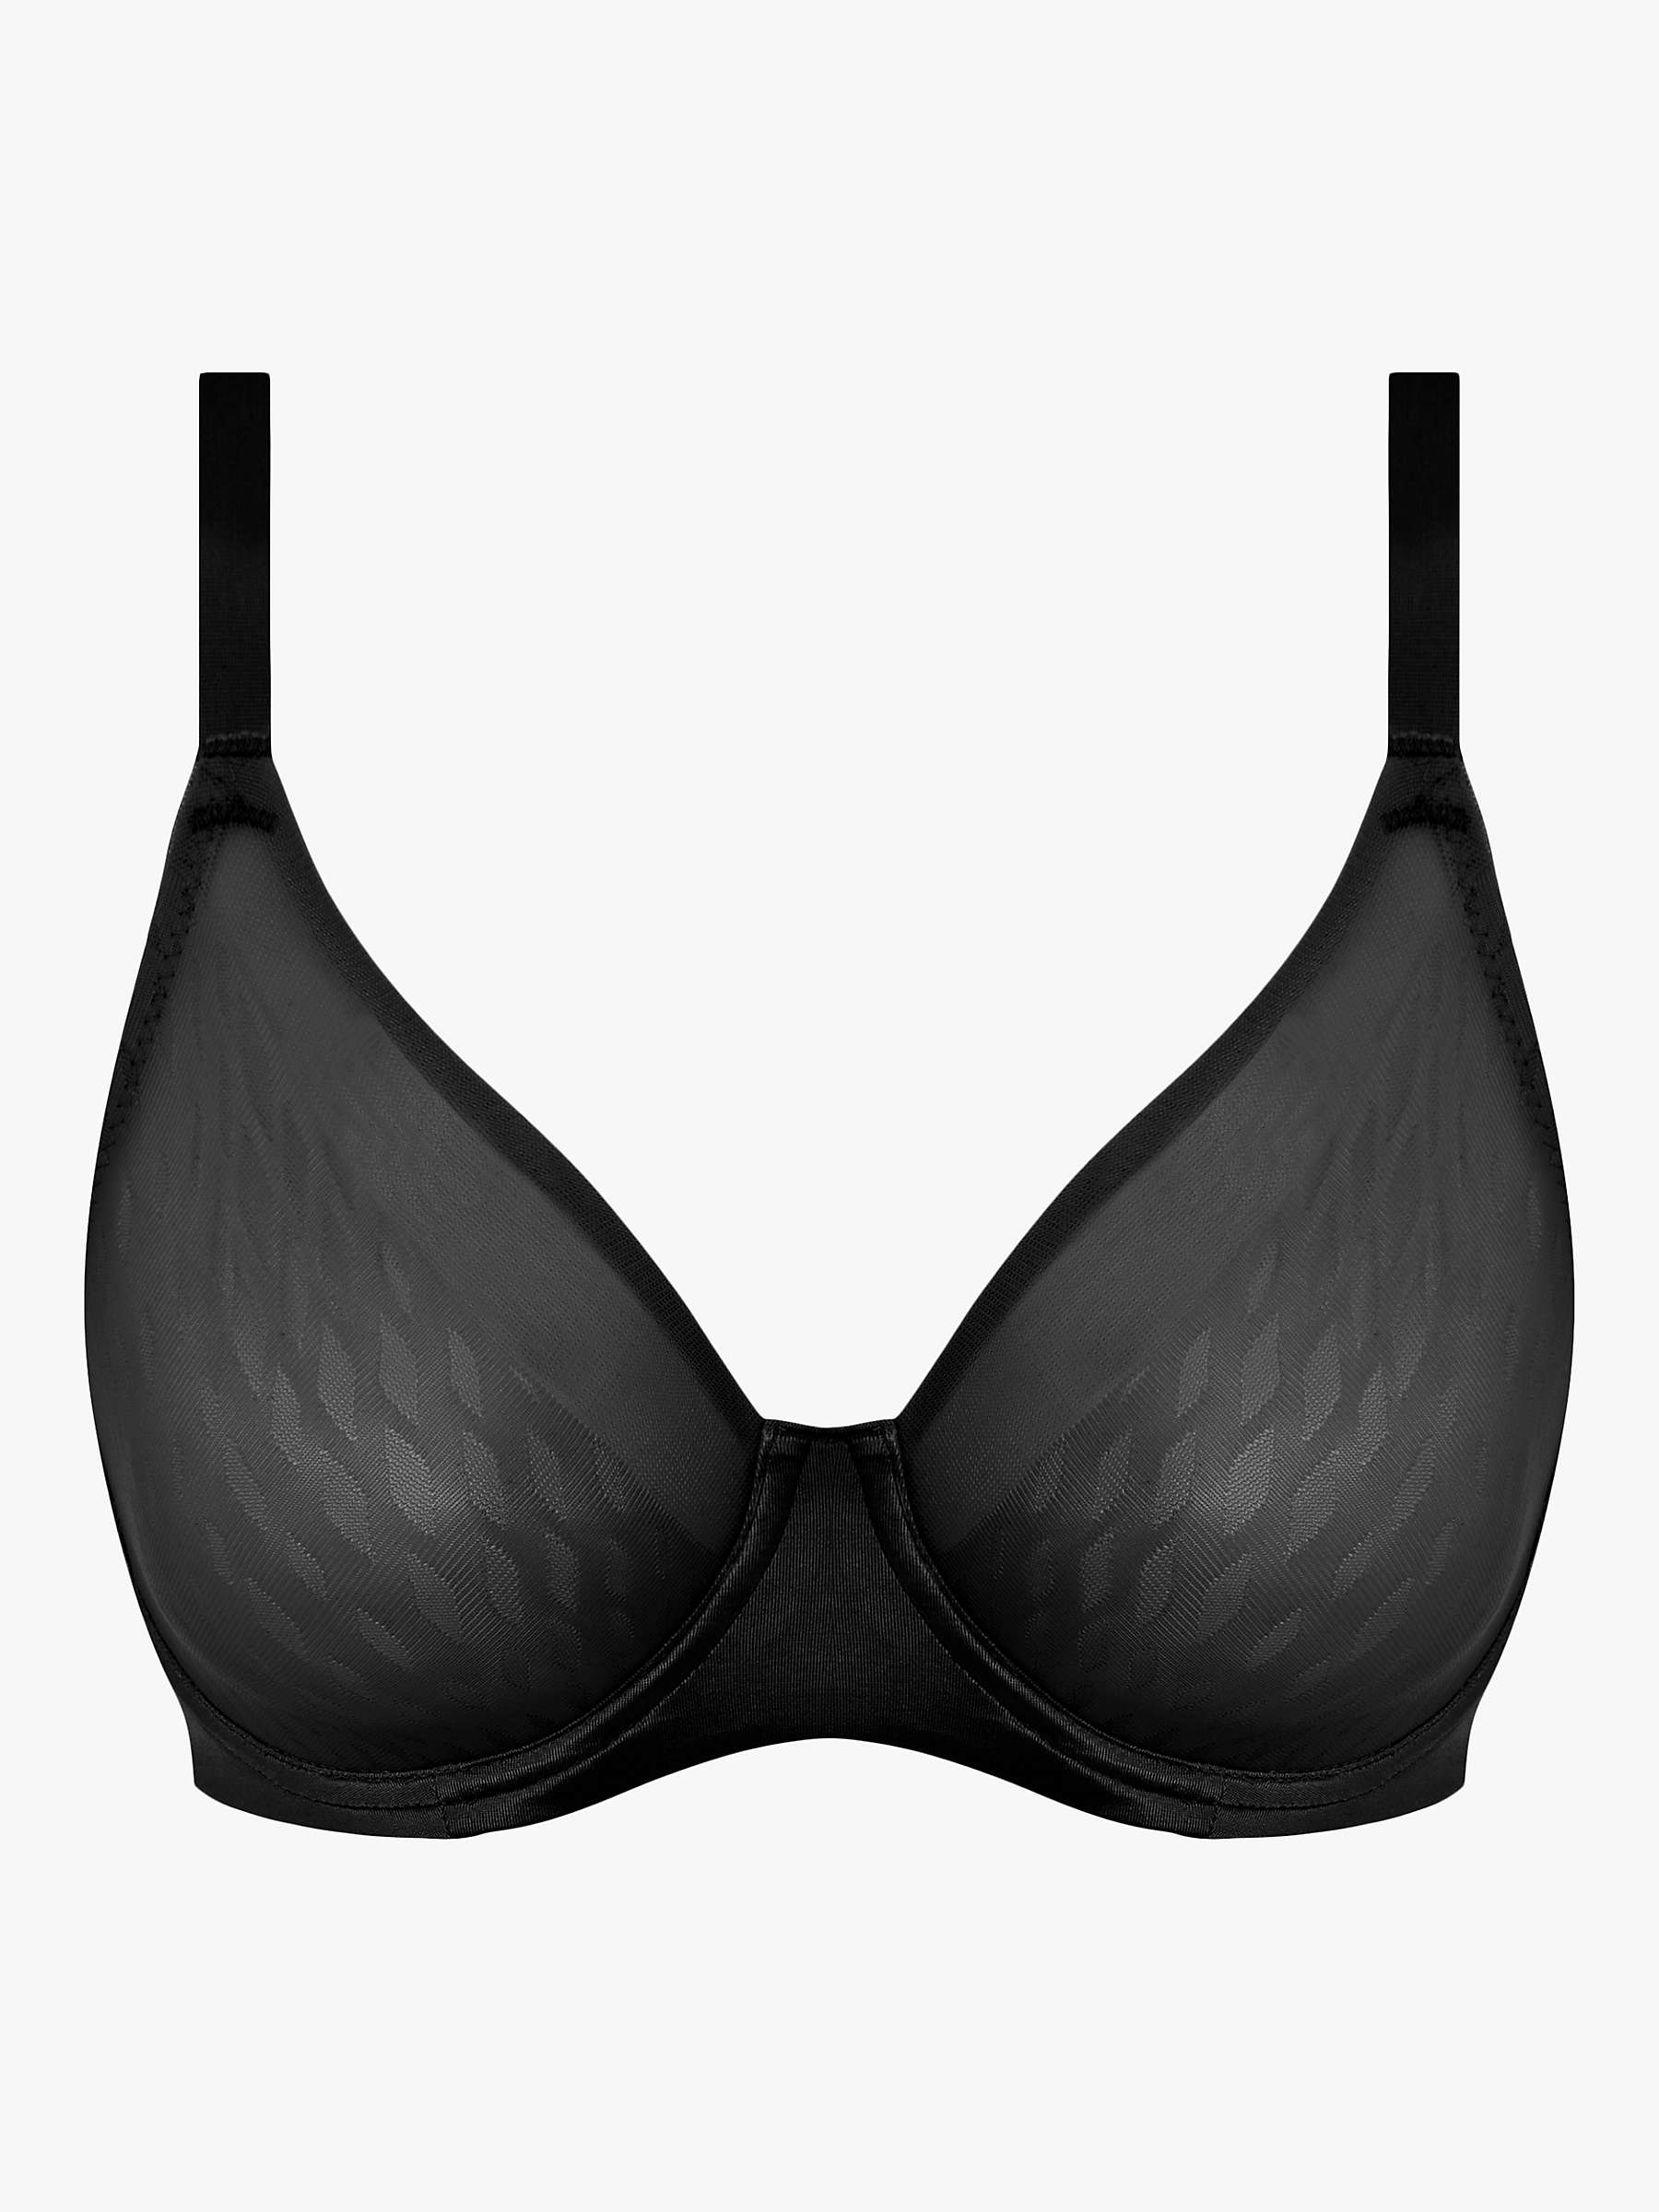 Buy Wacoal Elevated Allure Underwired Bra Online at johnlewis.com